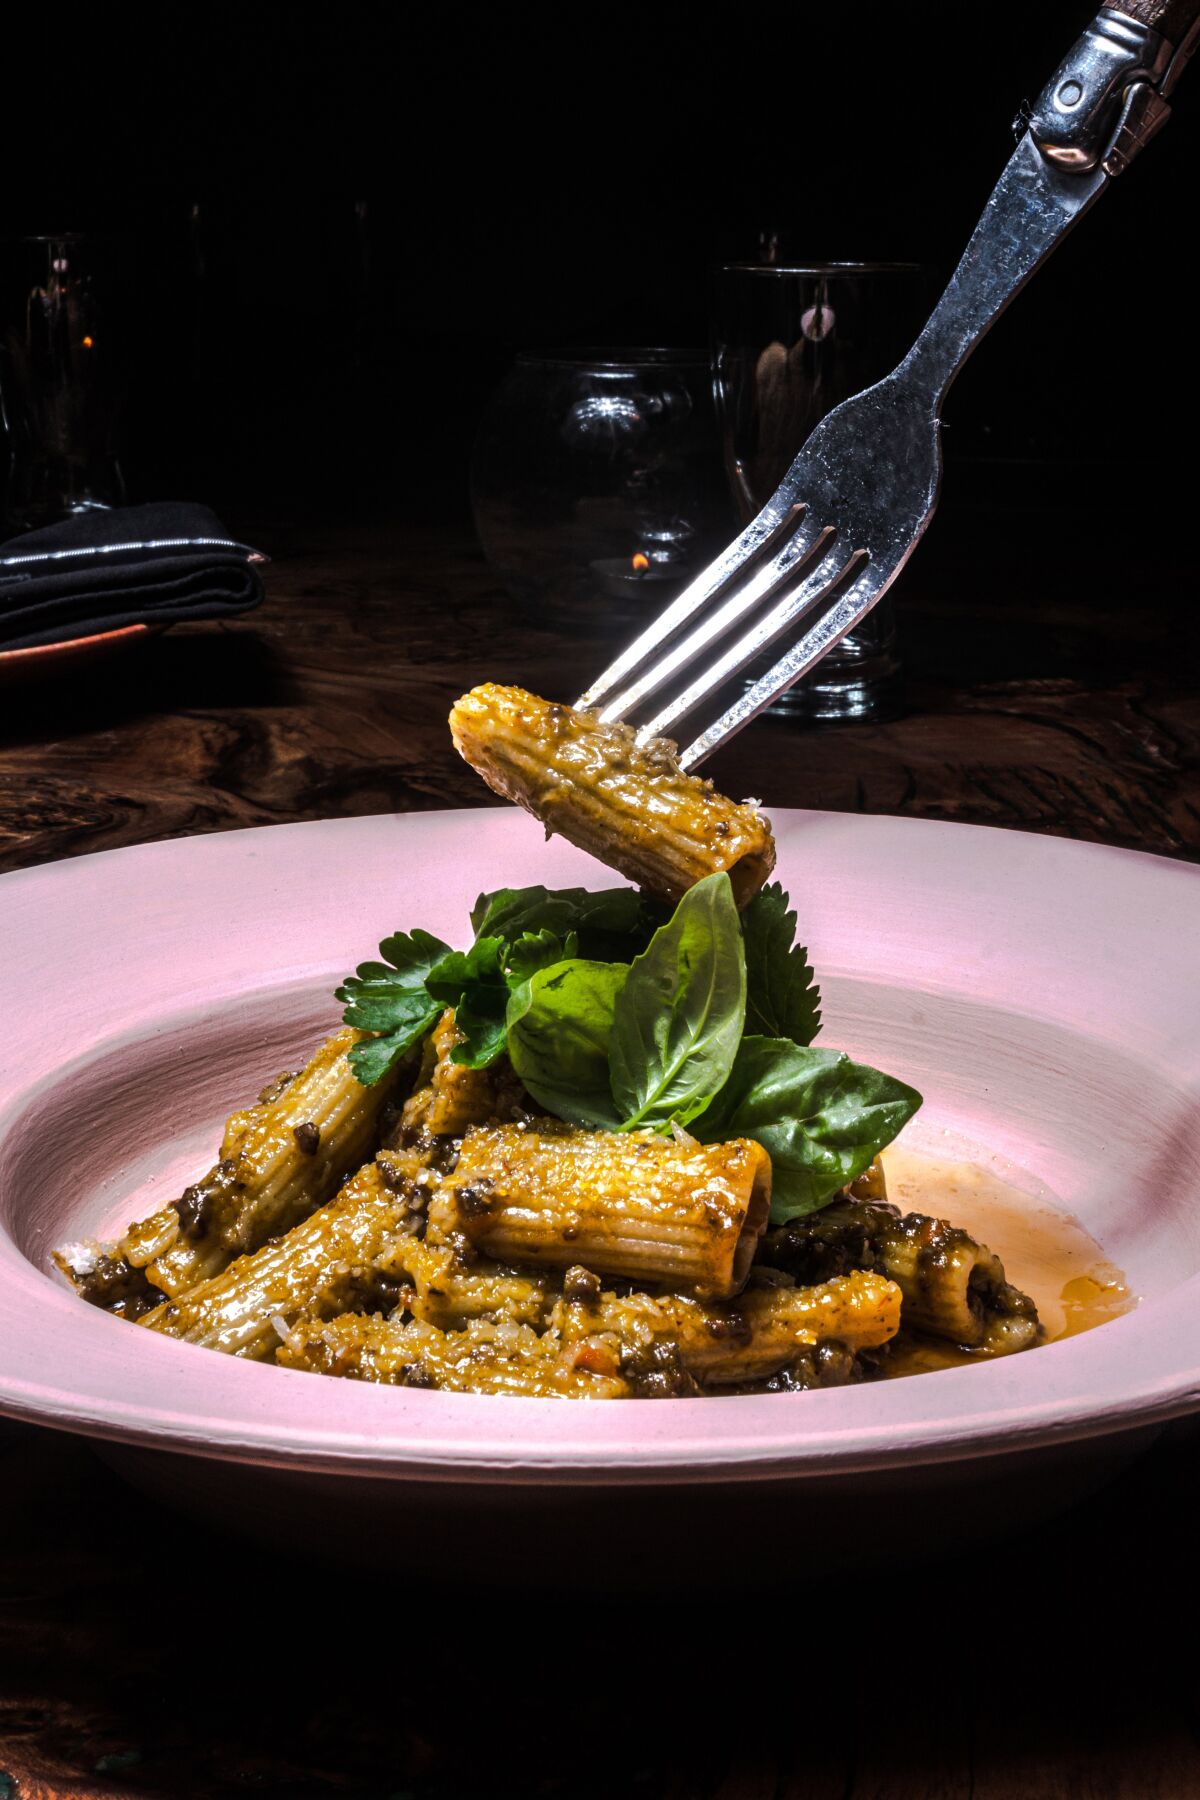 A fork lifts rigatoni in verde sauce at Ricardo Zarate and Michael Fiorelli's new Colibrí pop-up in West Hollywood.